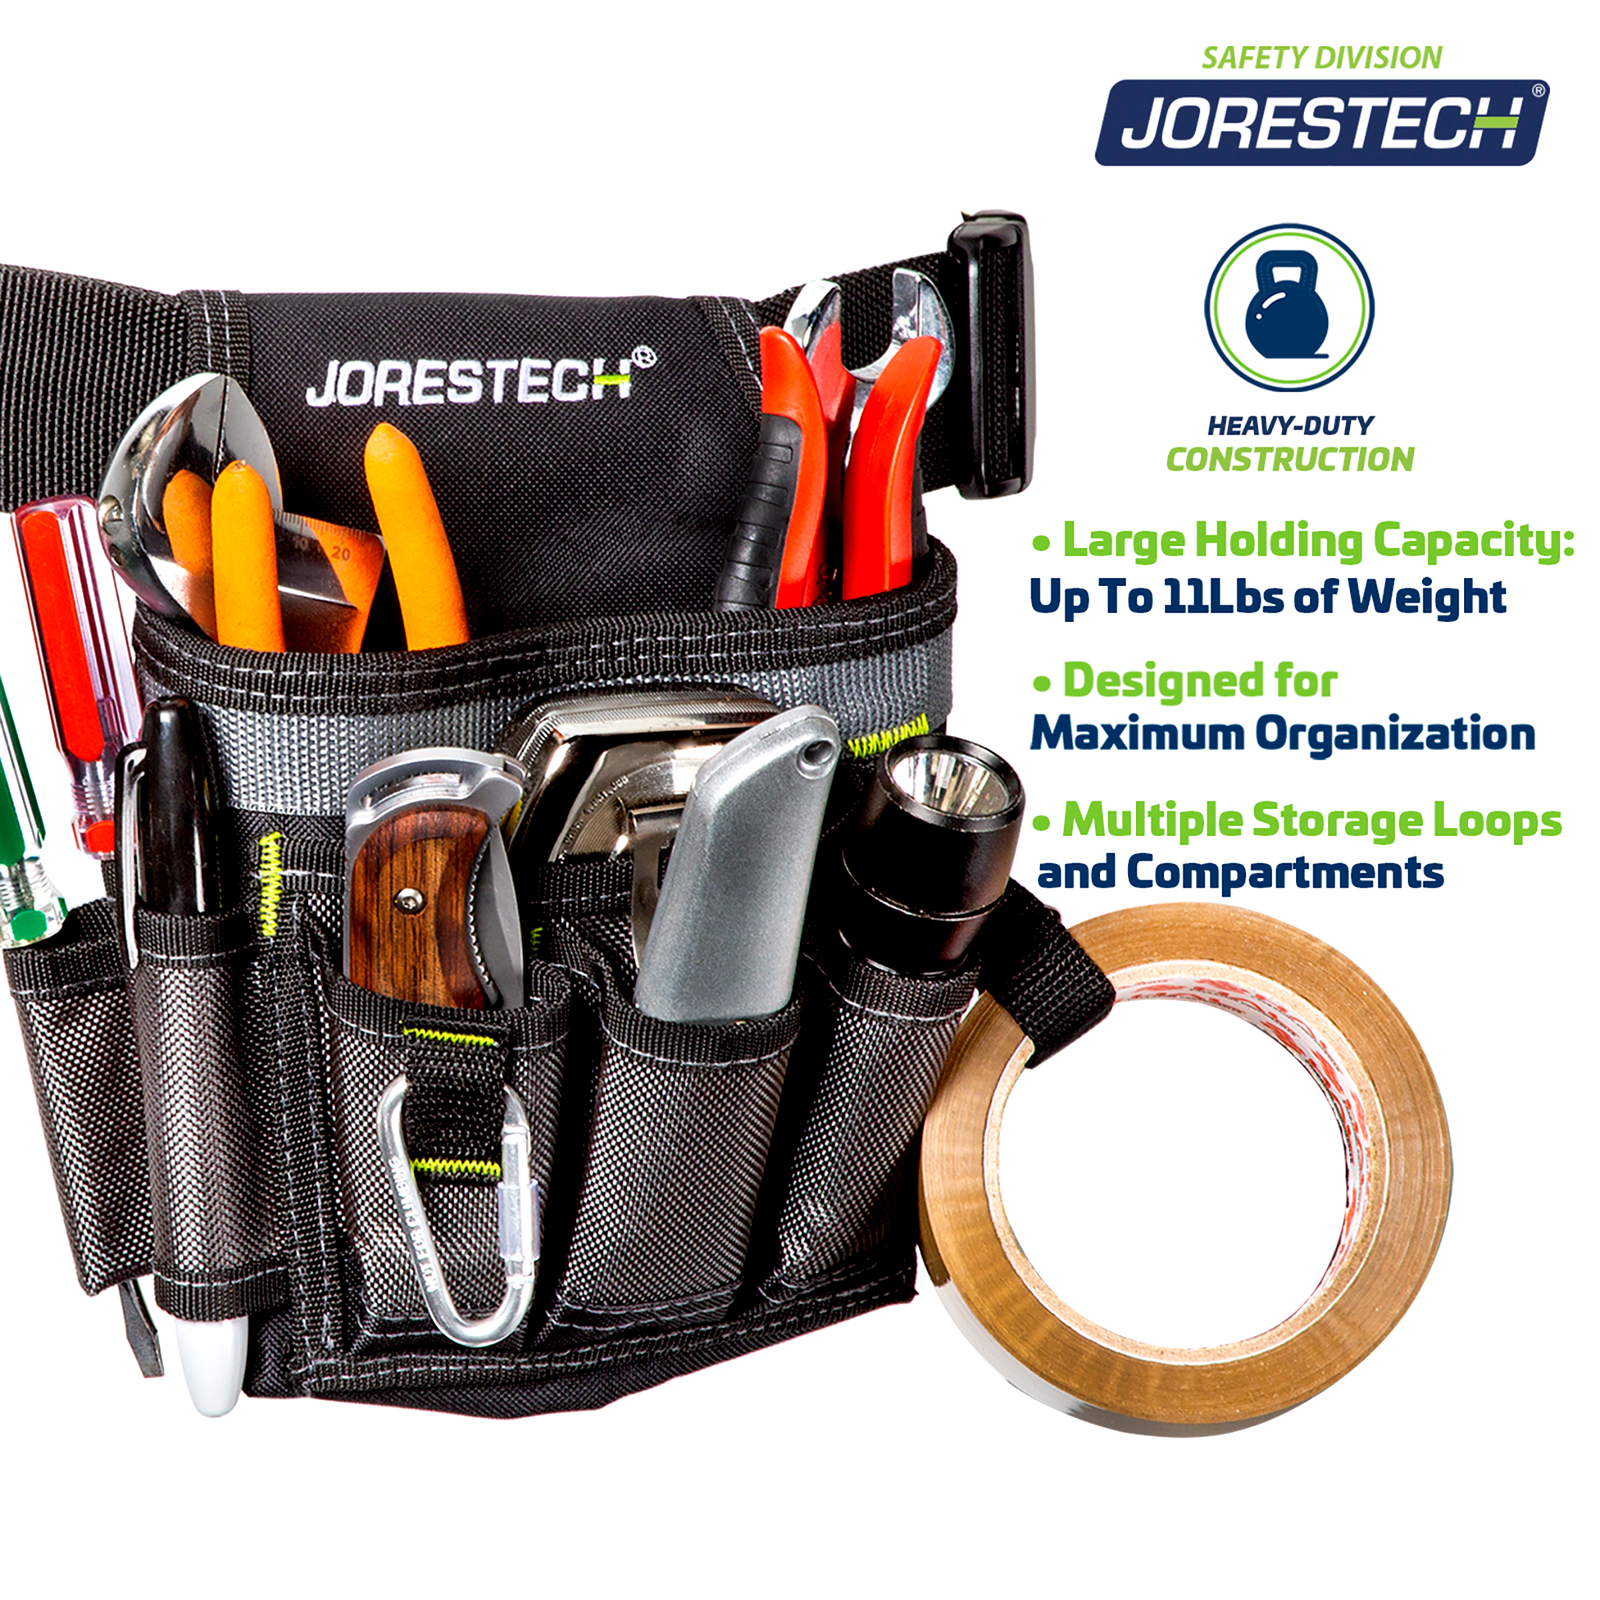 Diagonal view of the 6 pocket tool belt pouch filled with many tool. Text reads: heavy duty construction, large holding capacity up to 11lbs of weight. designed for maximum organization. multiple storage loops and compartments.